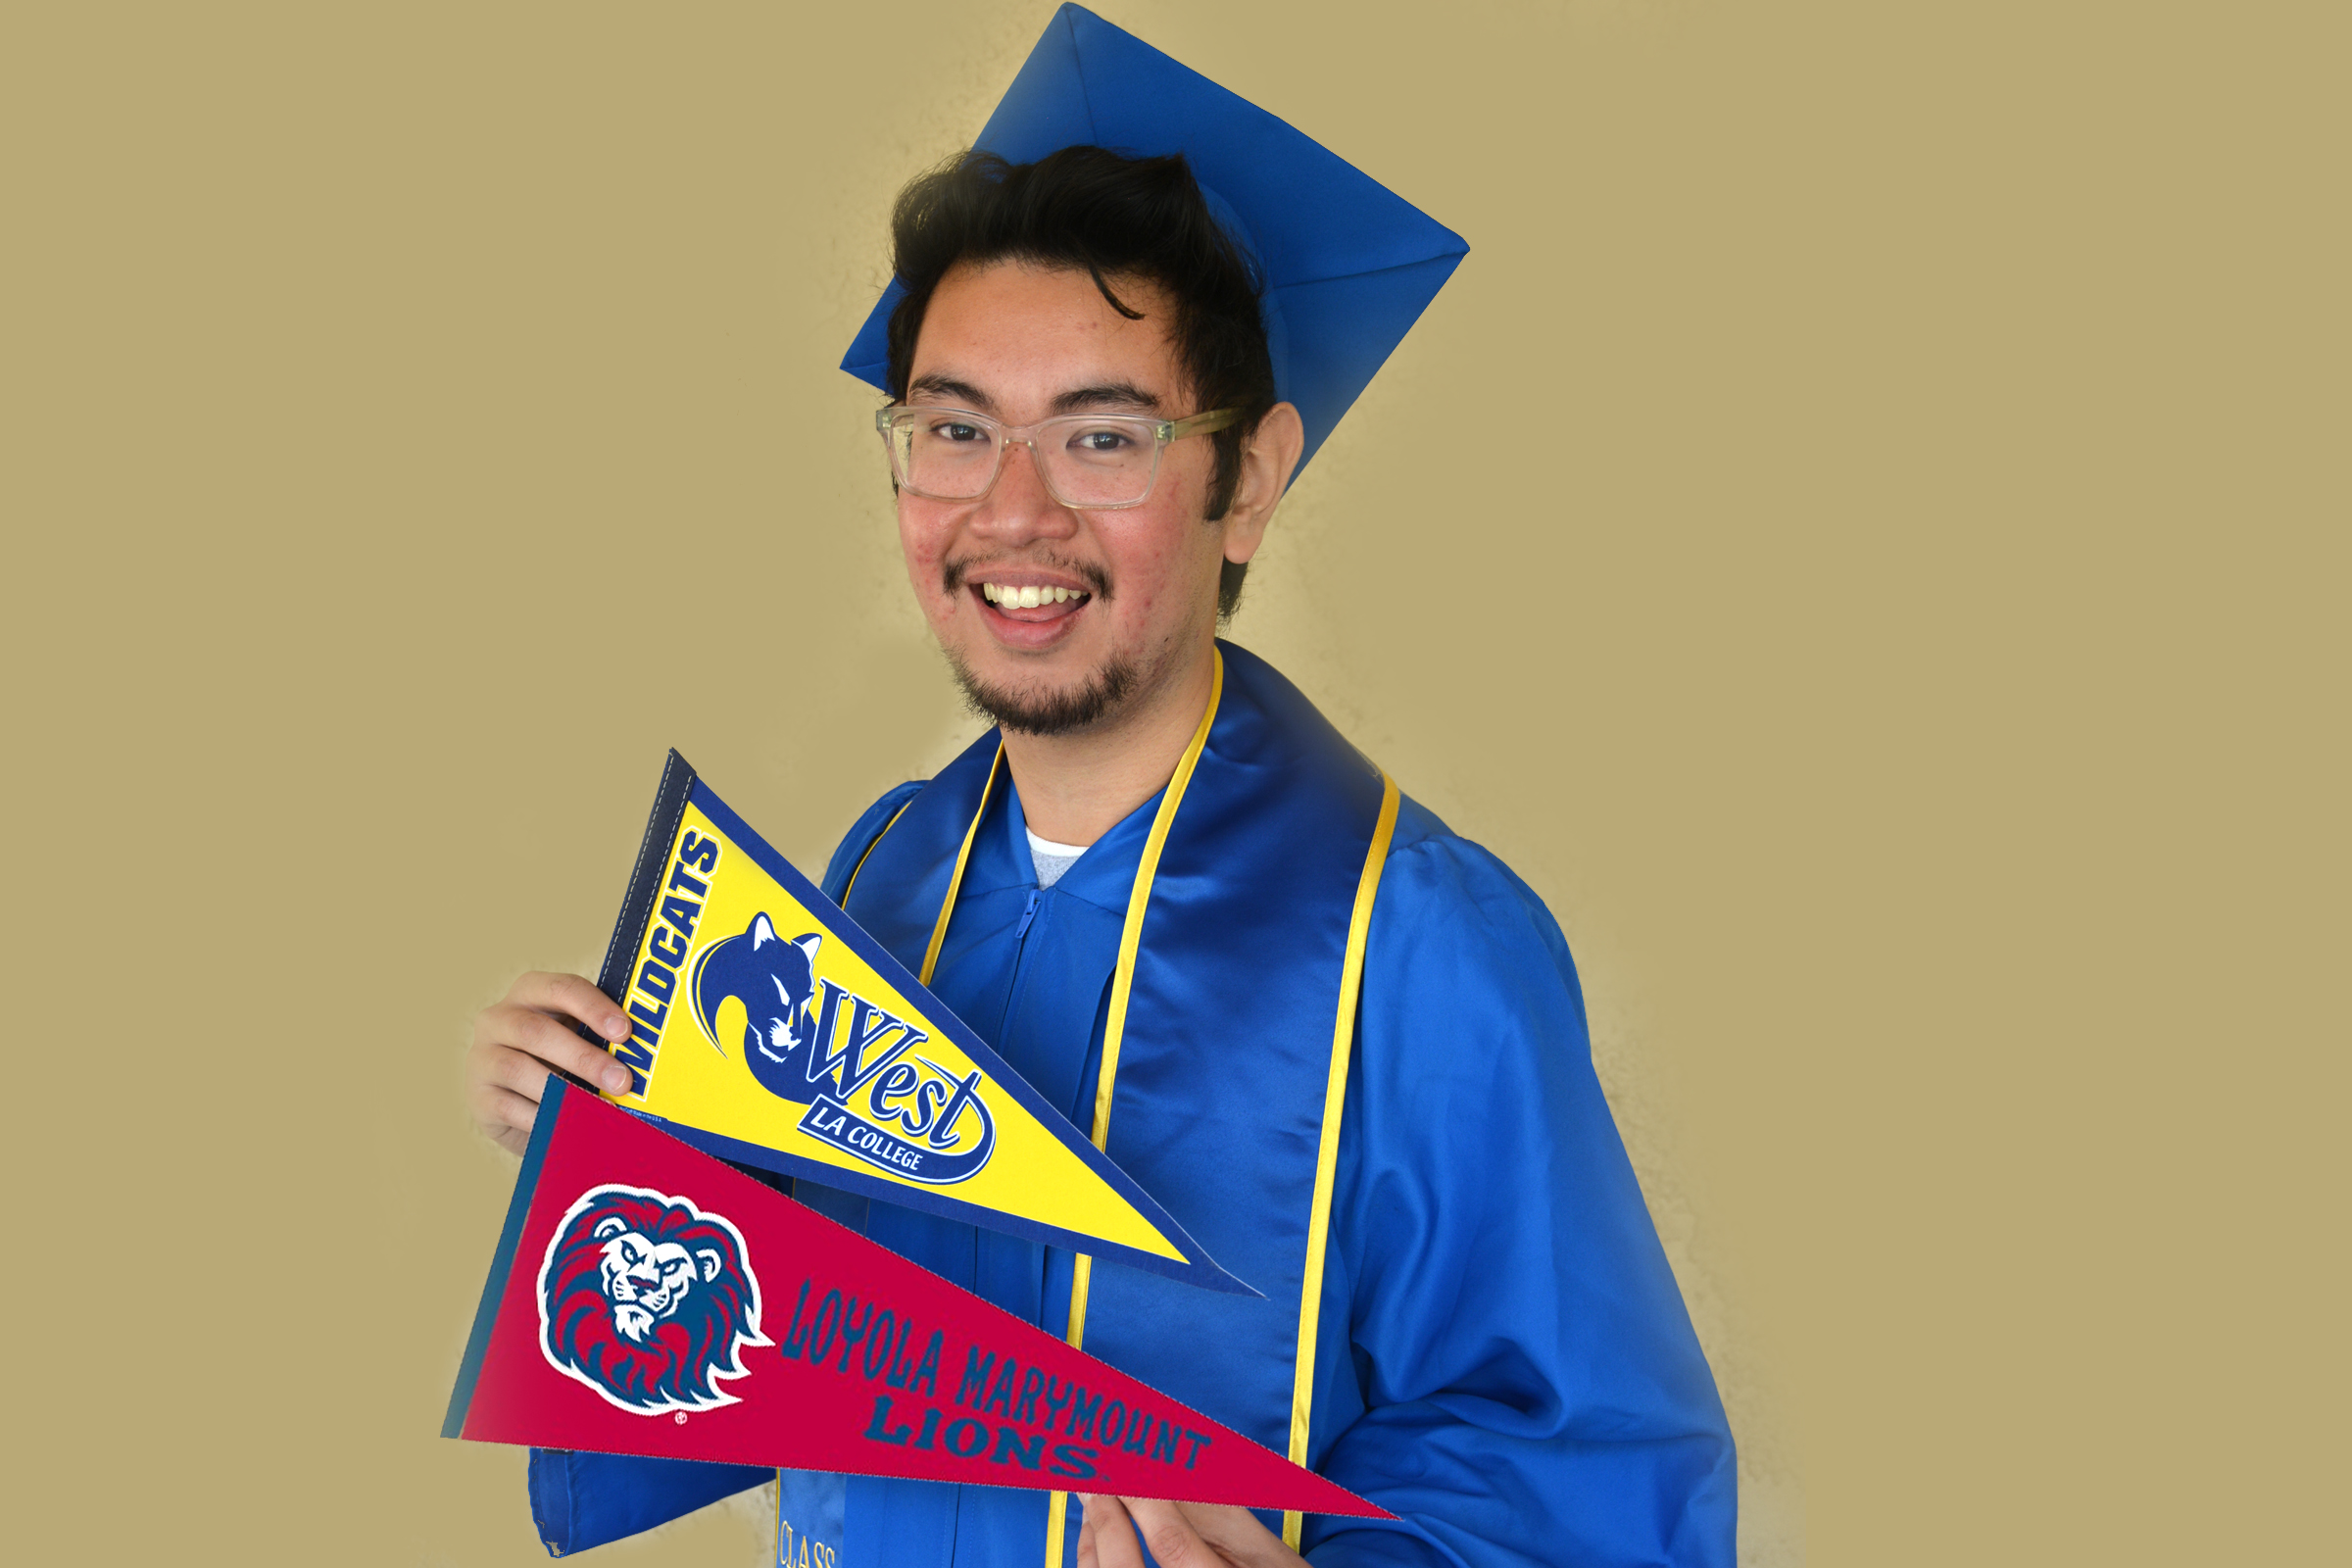 student holding WLAC and LMU pennants